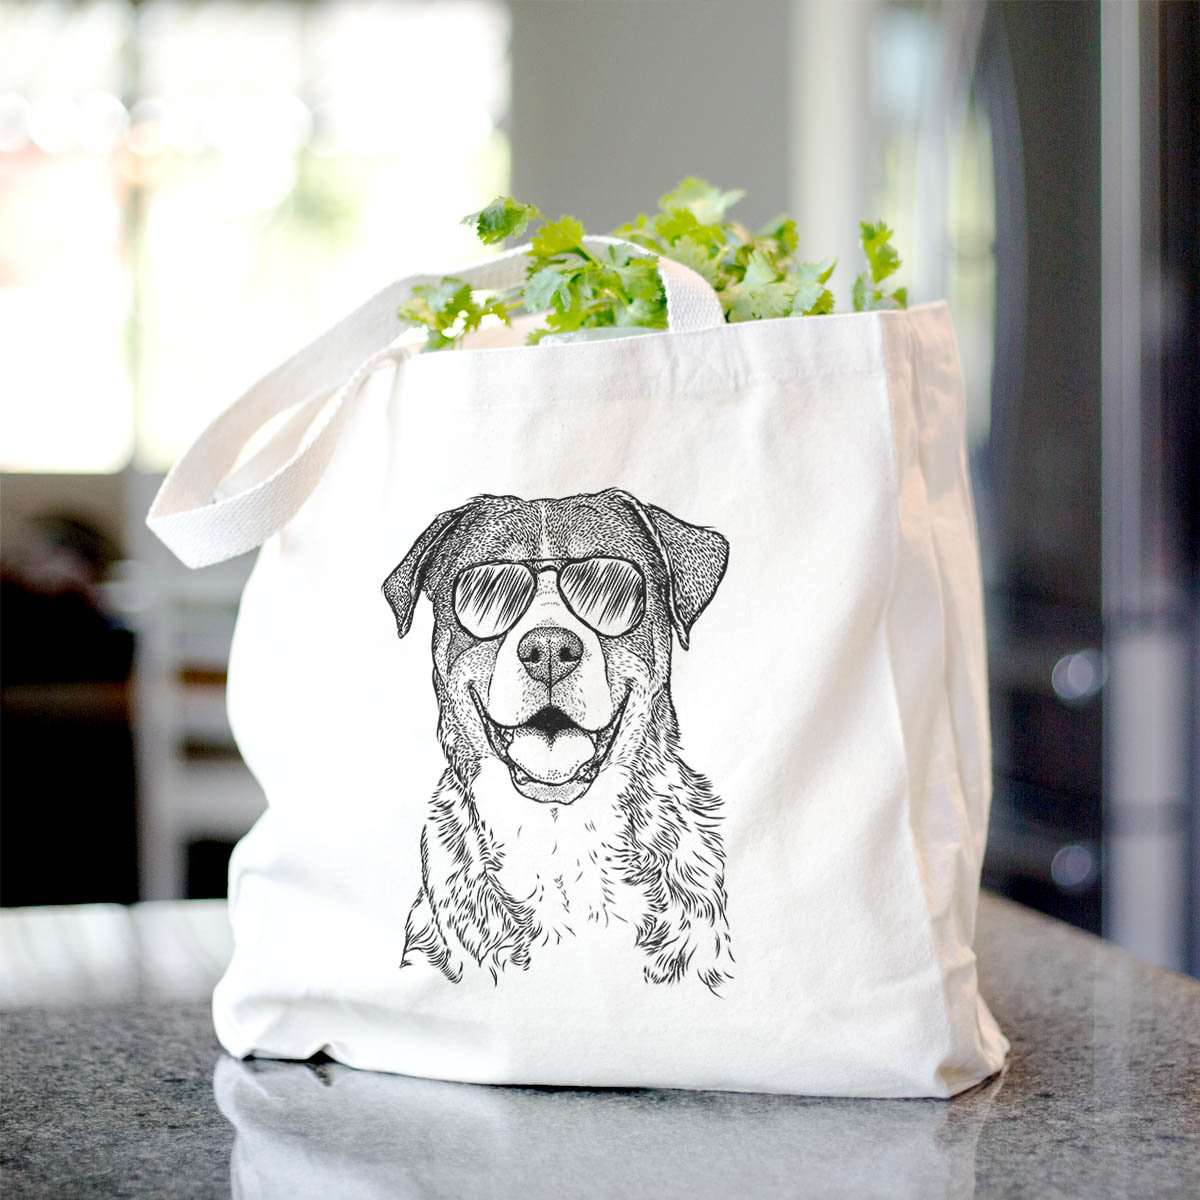 Leon the Greater Swiss Mountain Dog - Tote Bag